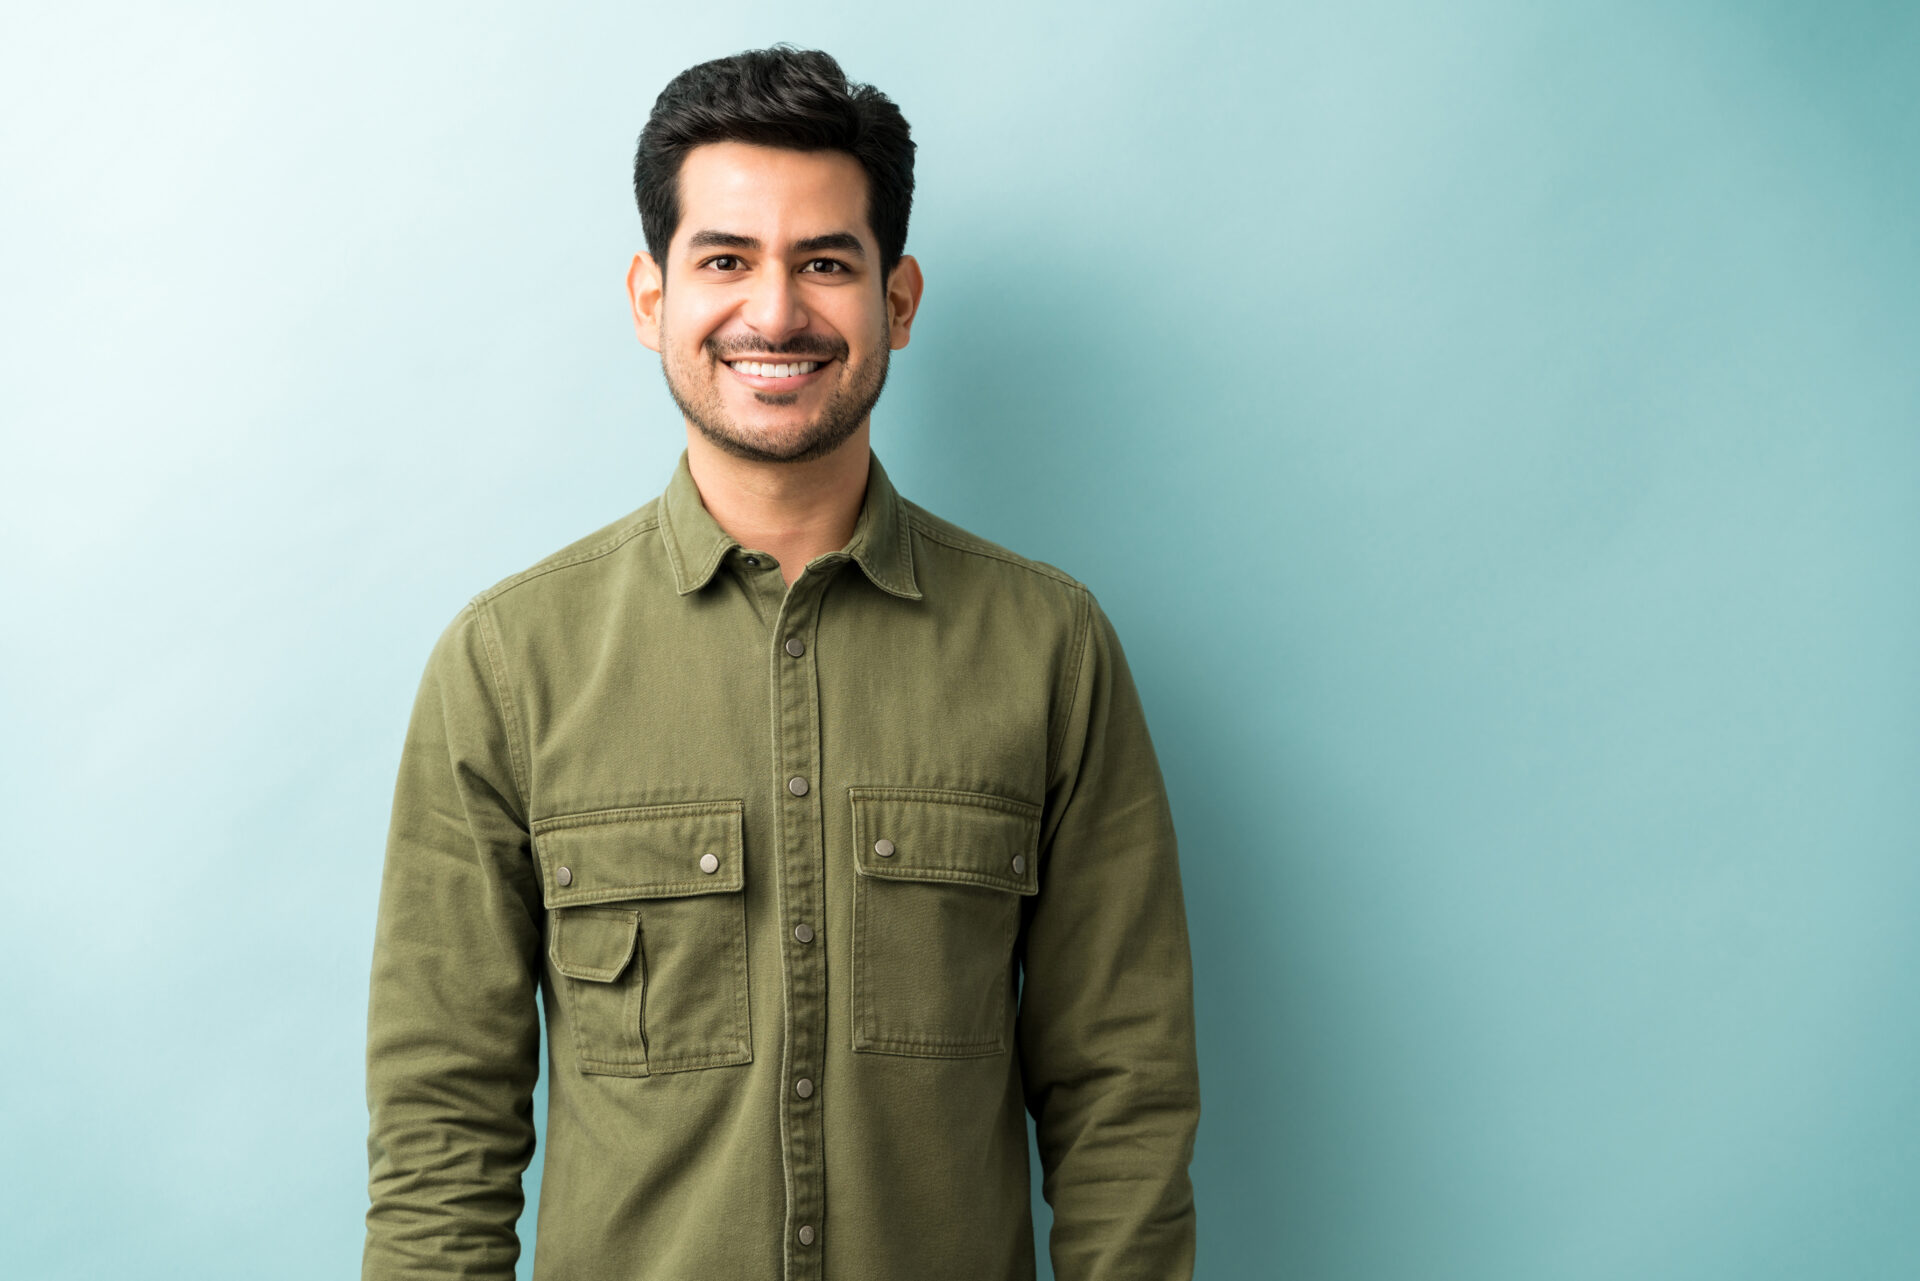 Handsome smiling man wearing green shirt standing against blue background